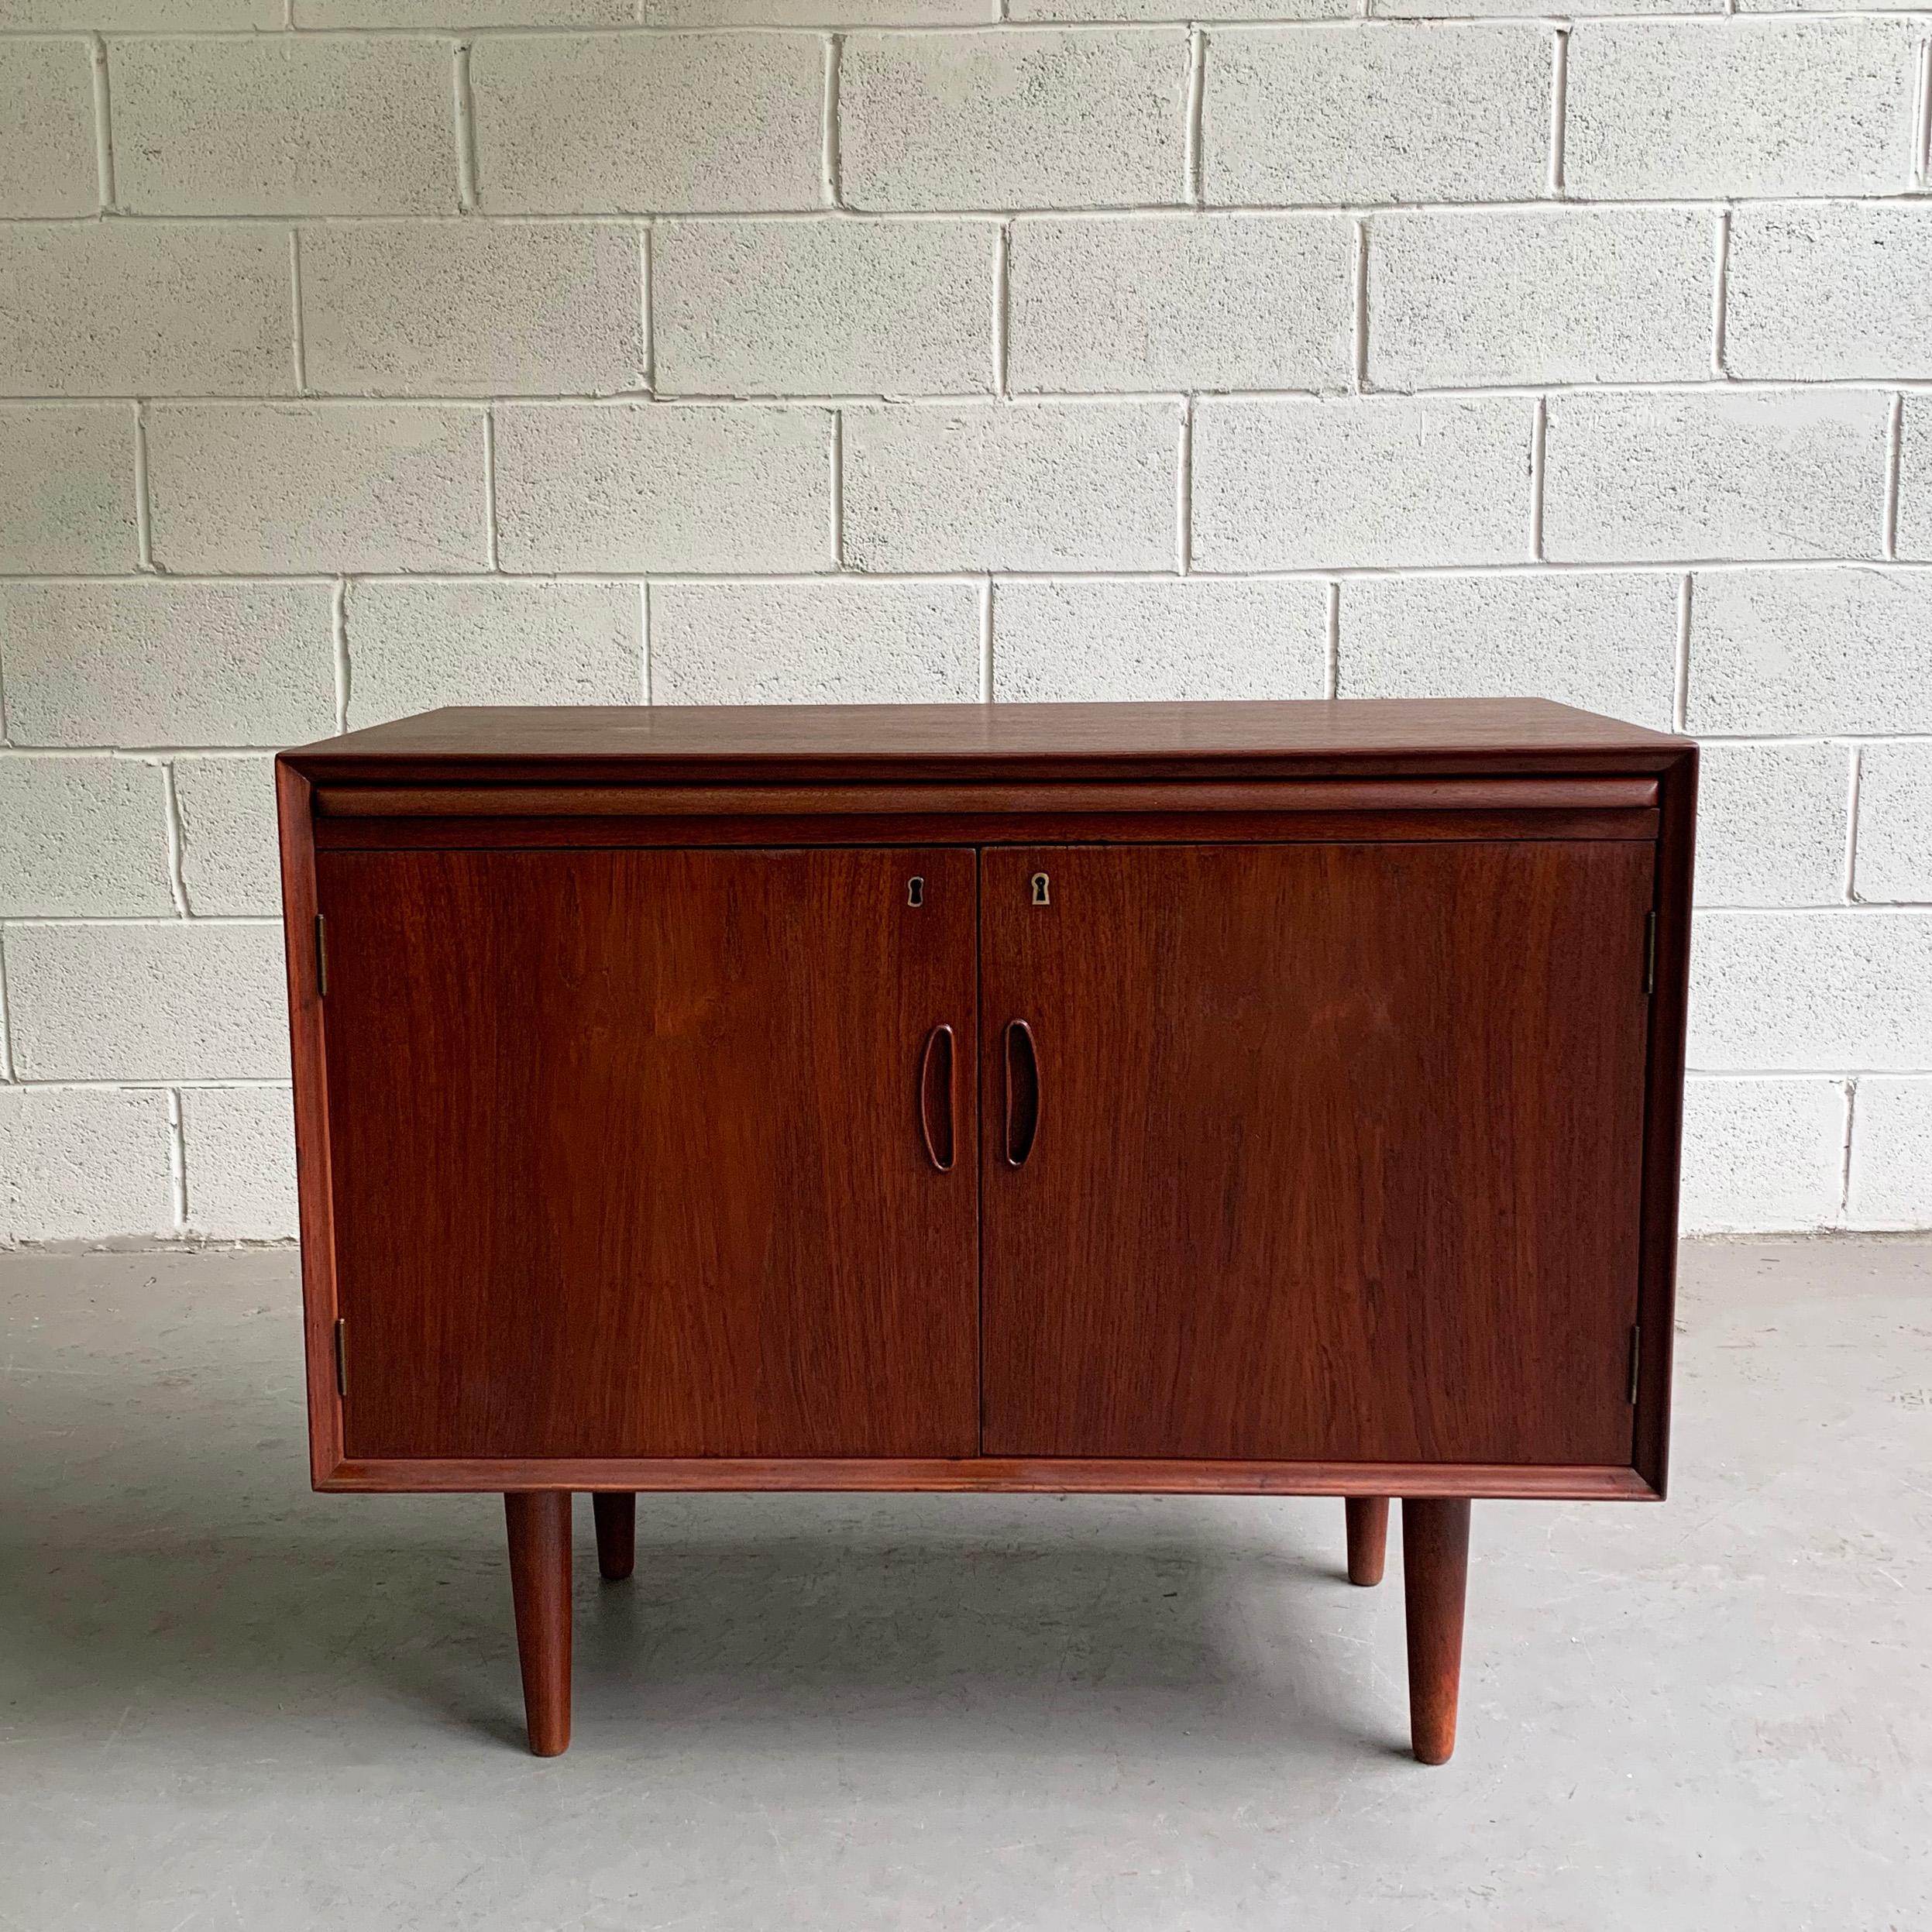 Scandinavian modern, teak bar cabinet or small credenza with recessed eyelet handles features open interior storage with 2 slim drawers on top and a pull-out, vinyl covered ledge for mixing drinks. The cabient is finished on it's back. There is no